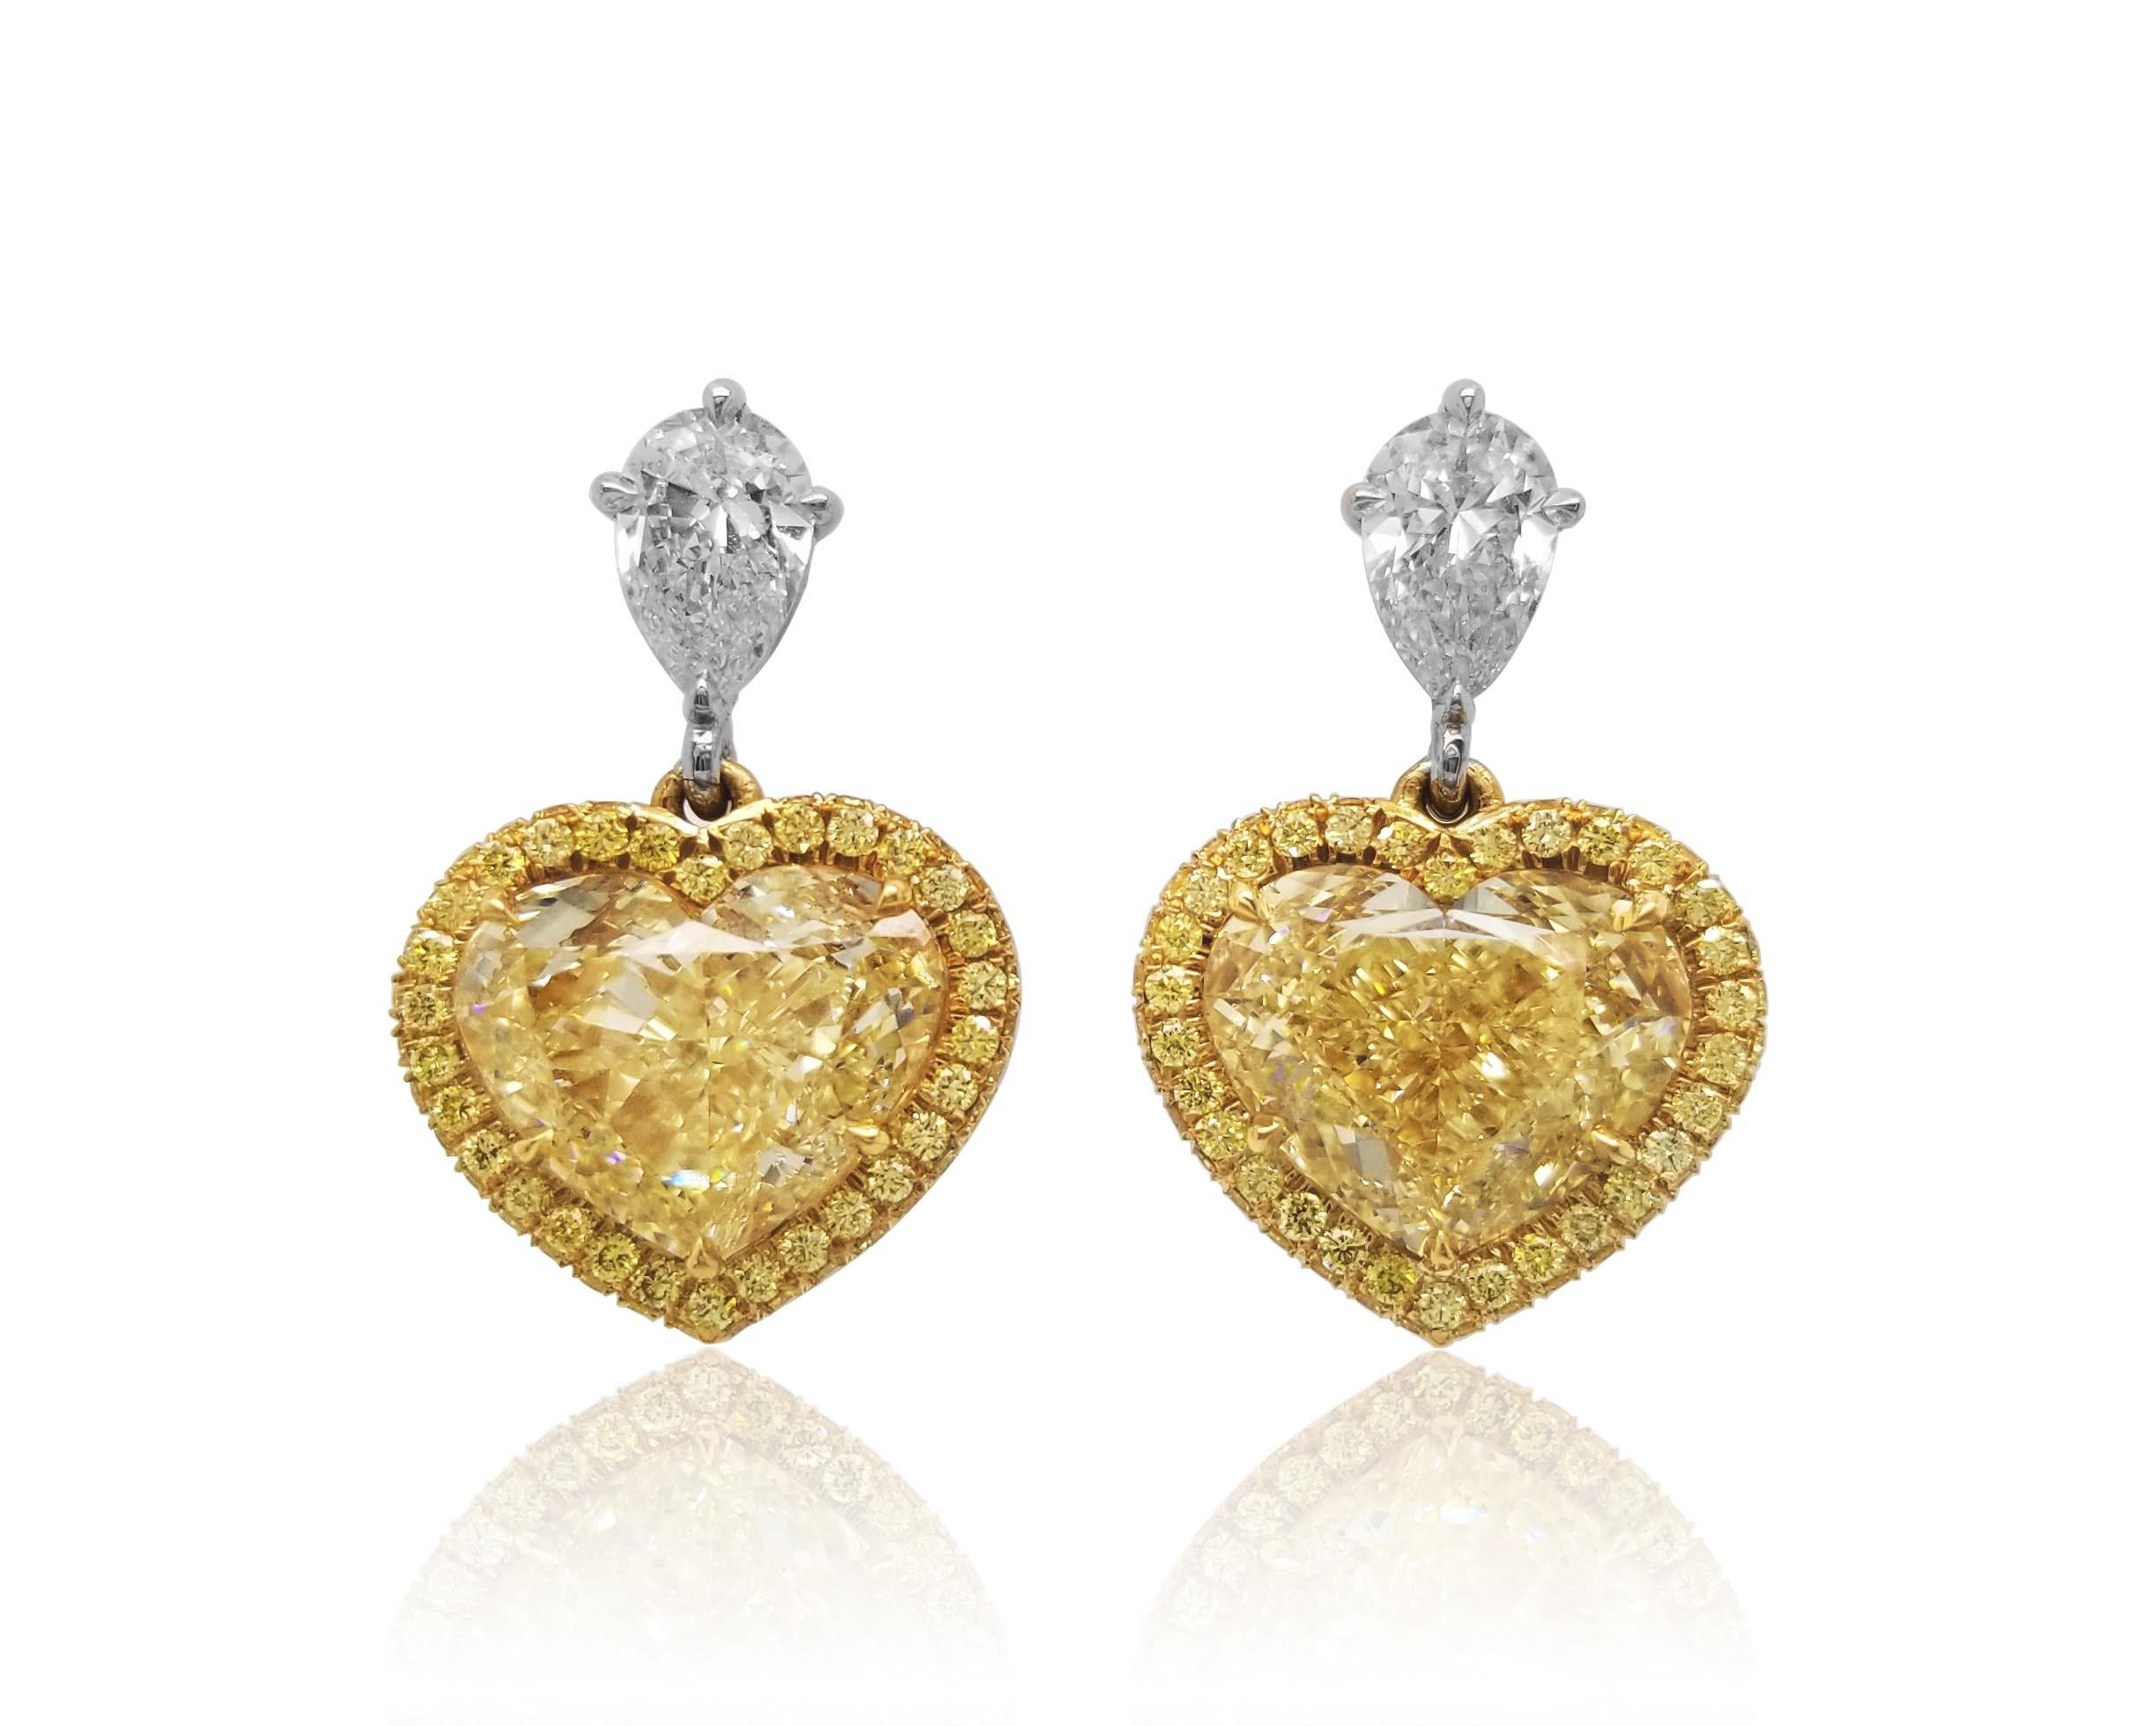 From the exclusive Collection at Scarselli, featuring 6+ carats fancy light yellow heart shaped Diamonds VS clarity with GIA certifications (see certificate pictures for detailed stones information). The Yellow Diamonds are beautifully set up in 18k